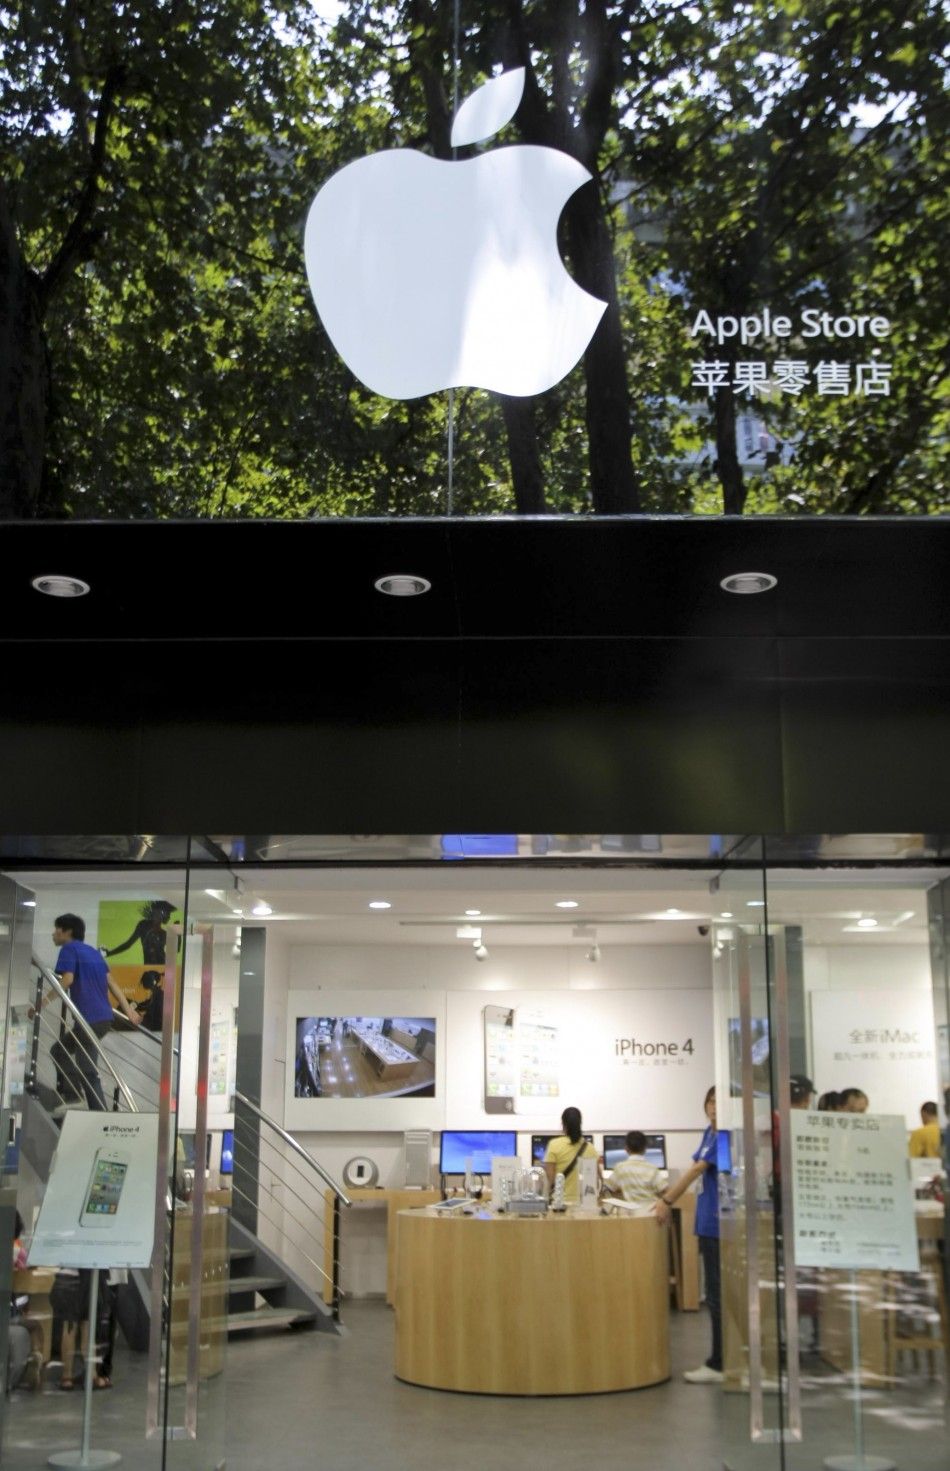 Customers and employees are seen in a fake Apple store in Kunming, Yunnan province July 21, 2011.